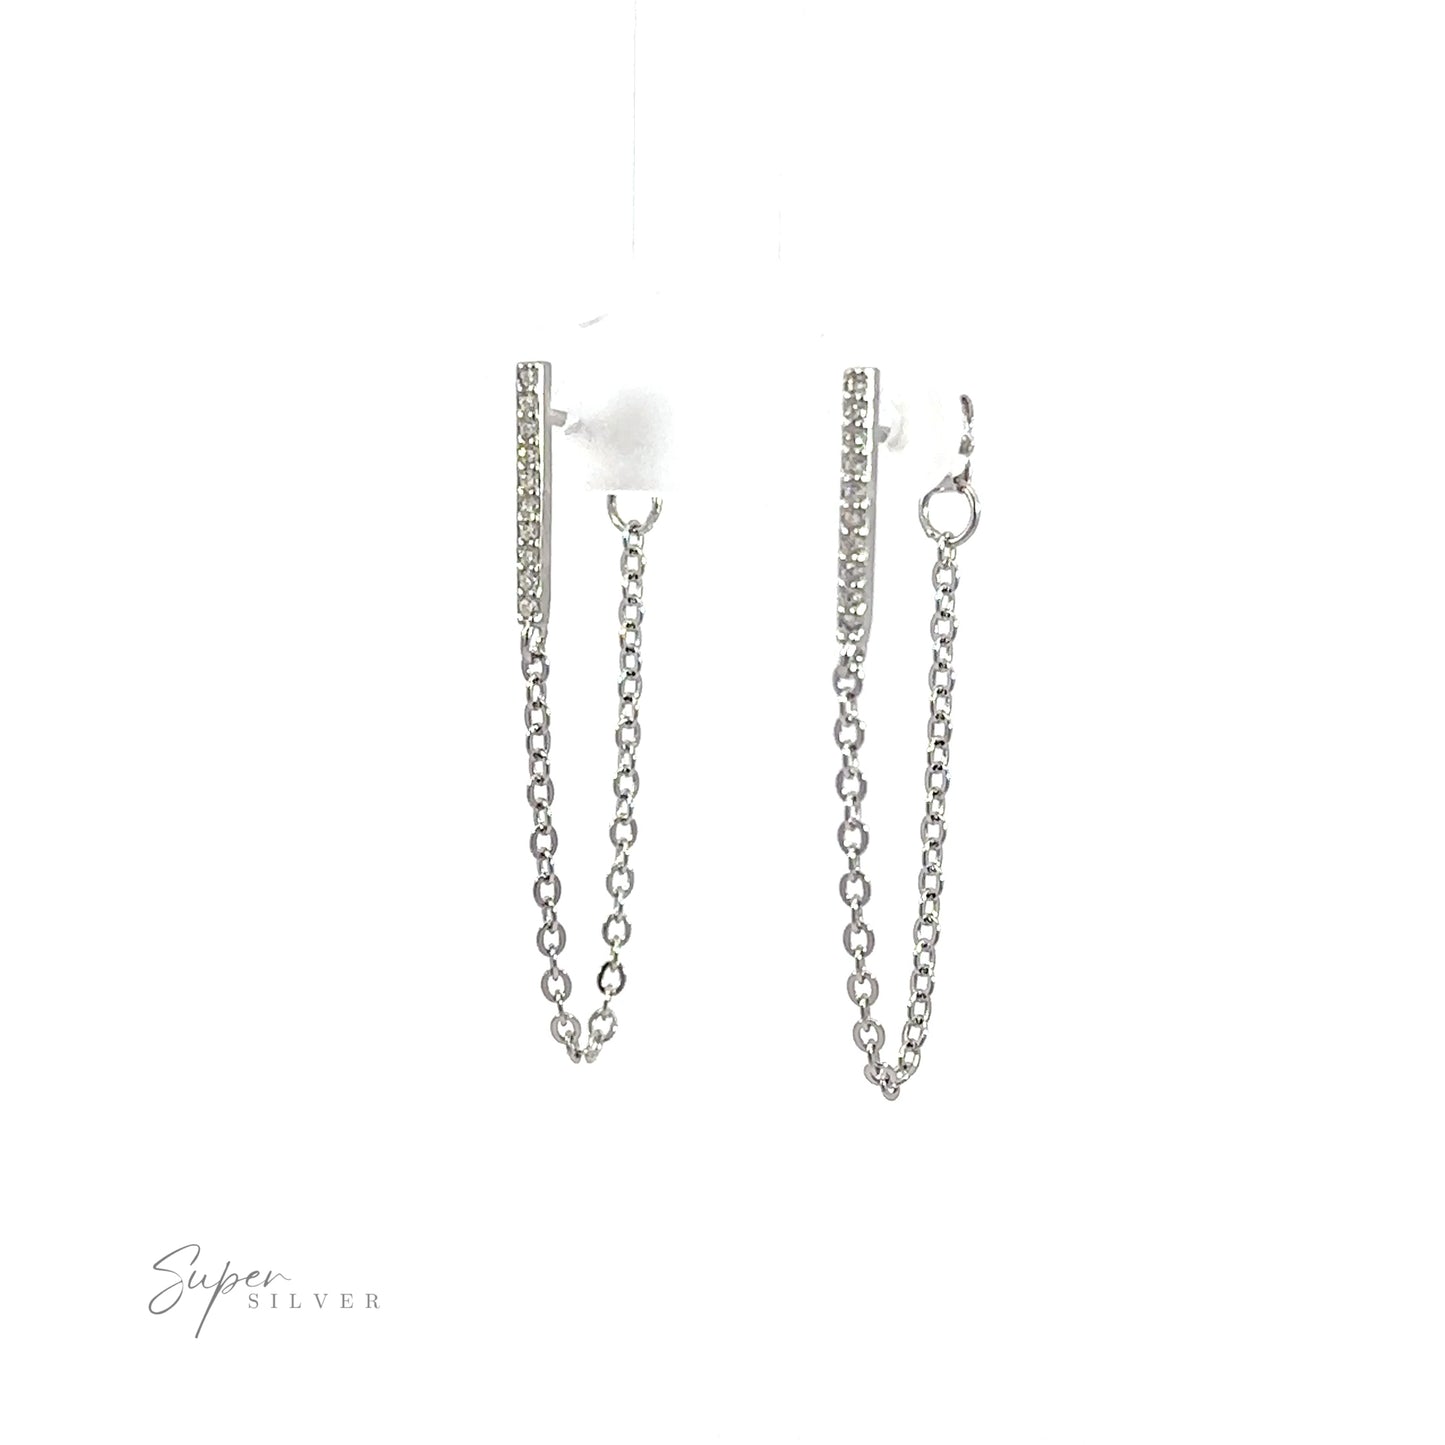 A pair of silver earrings with CZ Bar Studs with Chain.